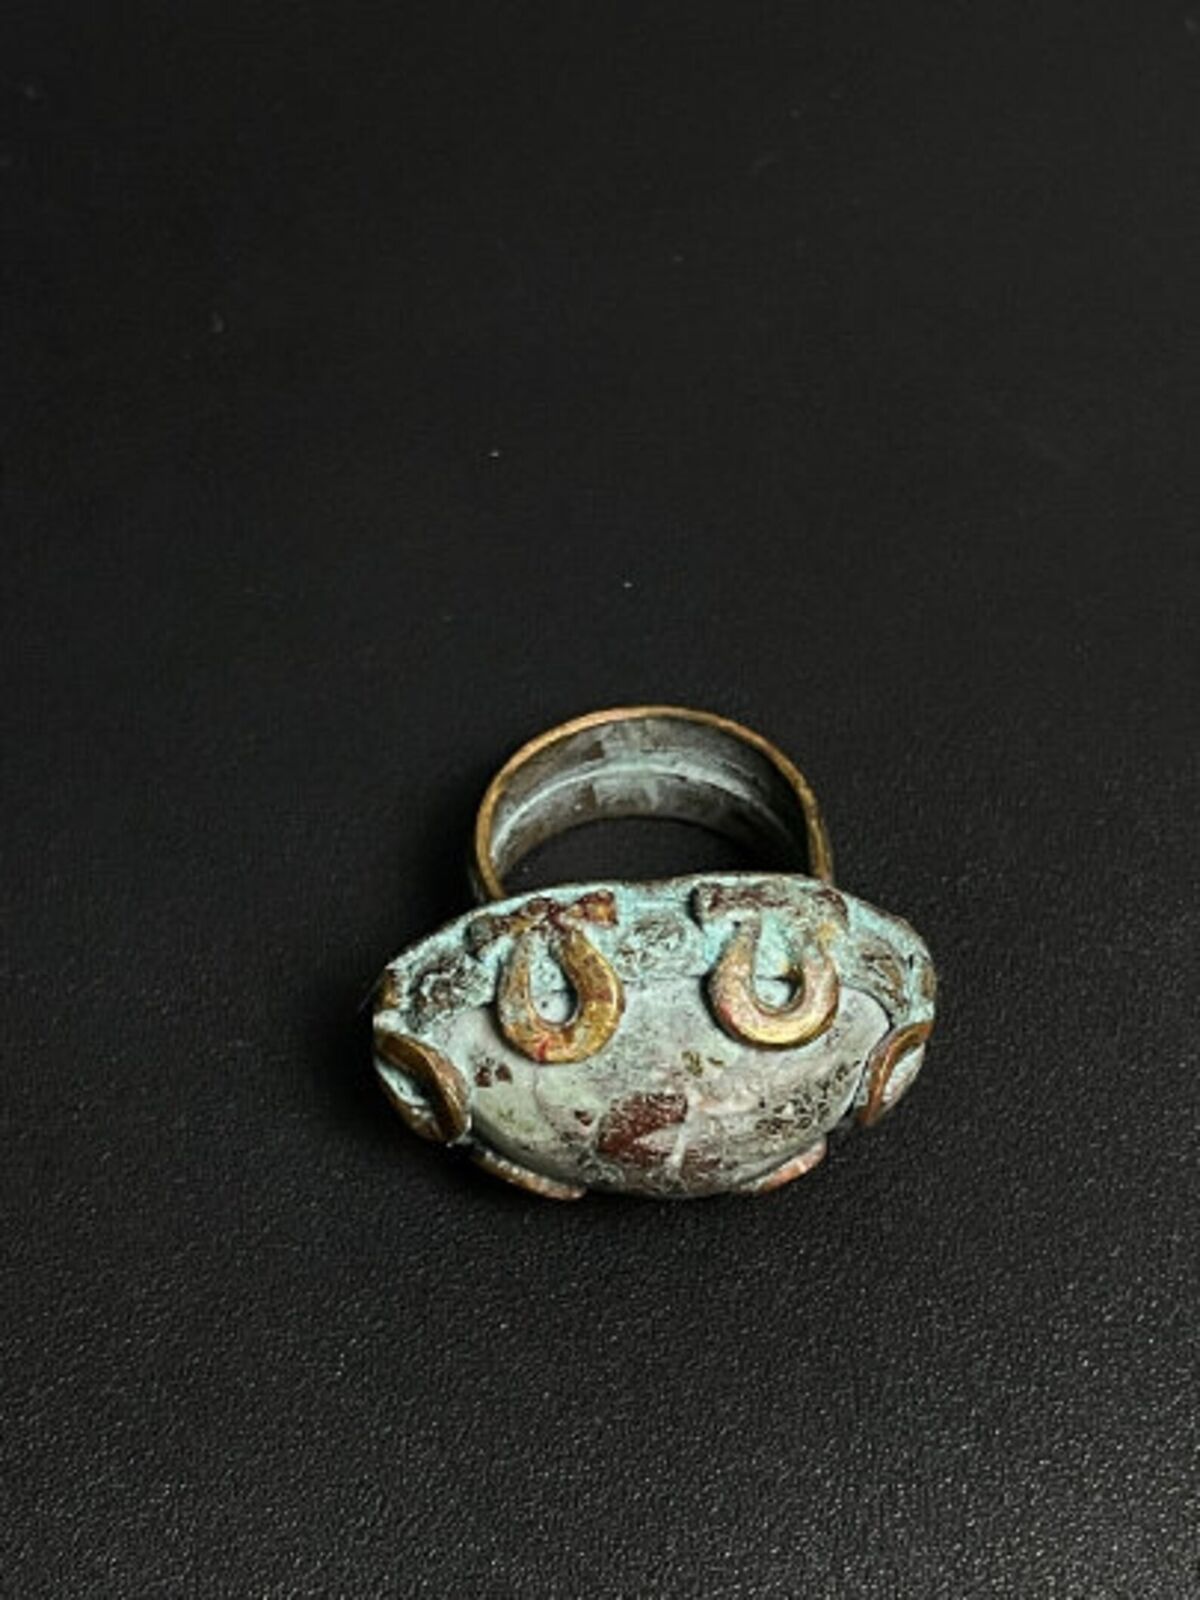 Fantastic Ancient Egyptian Ring with the beautiful Details